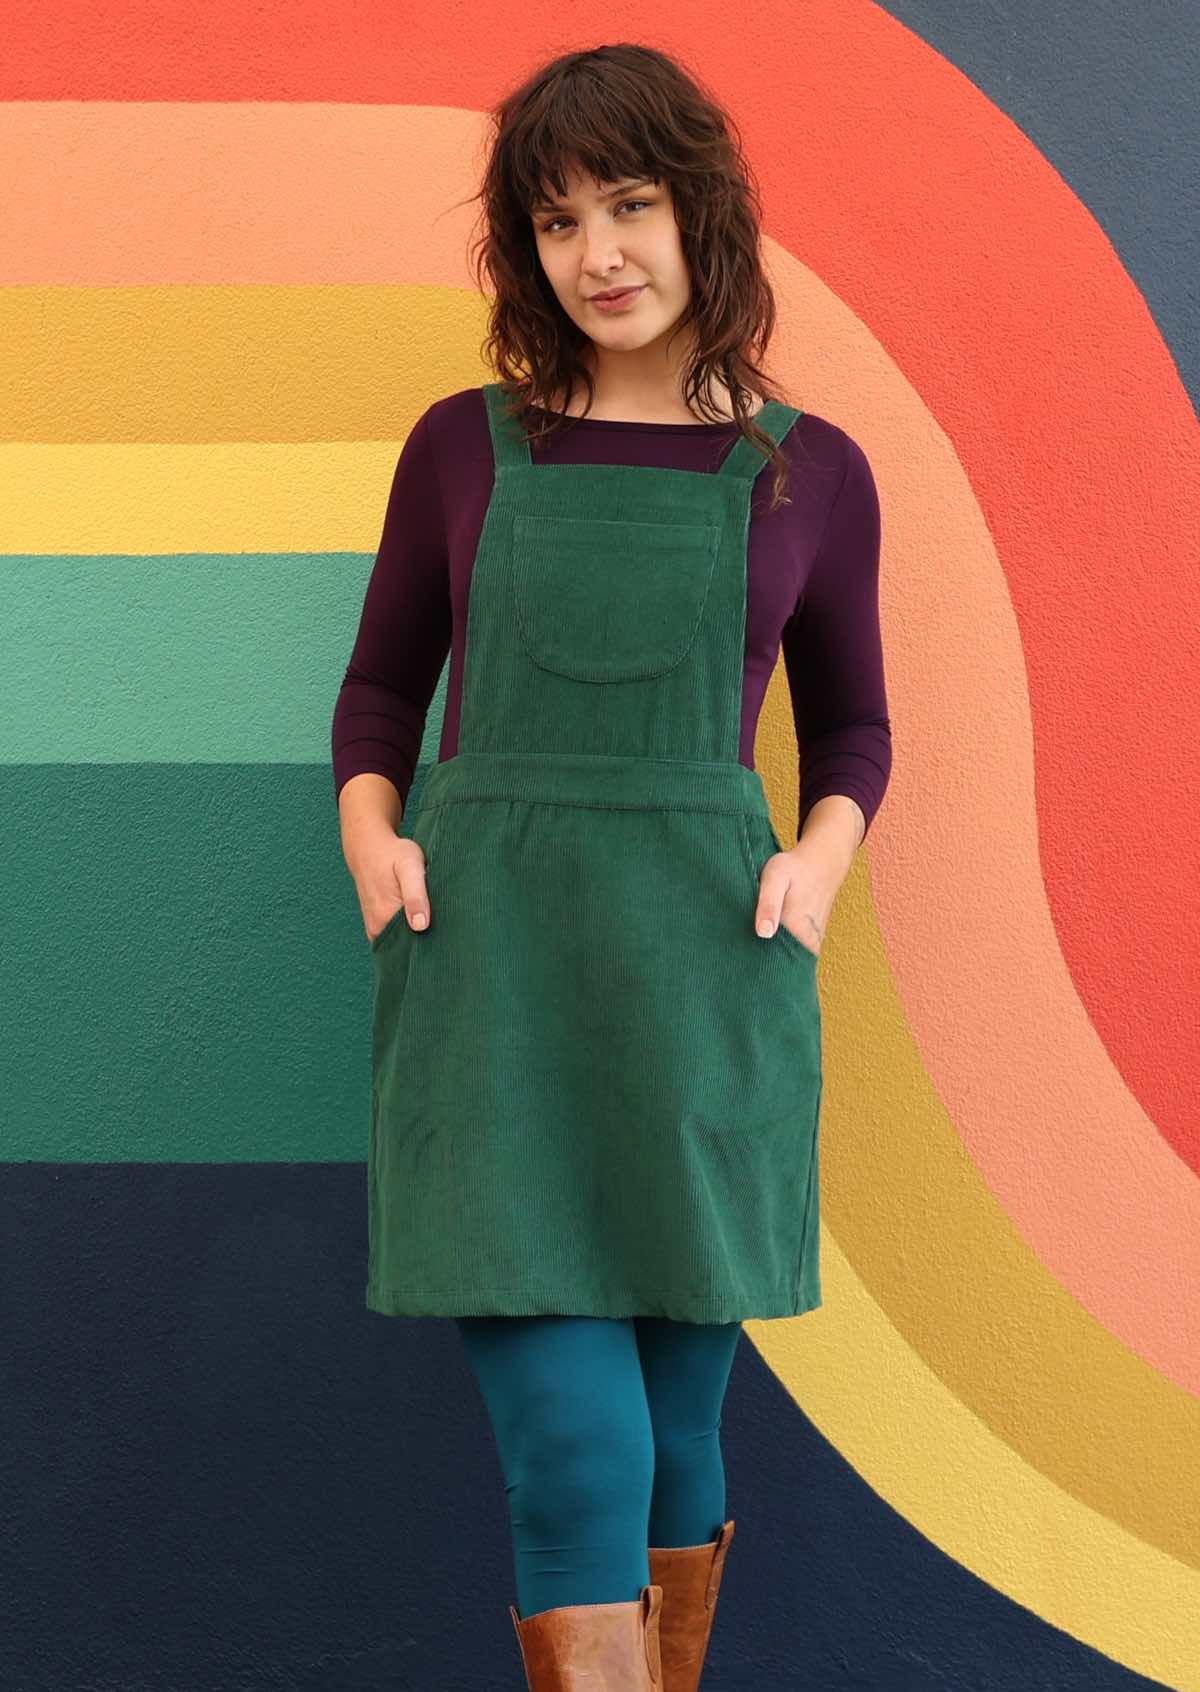 woman wearing green corduroy pinafore over purple top and teal leggings both hands in pockets